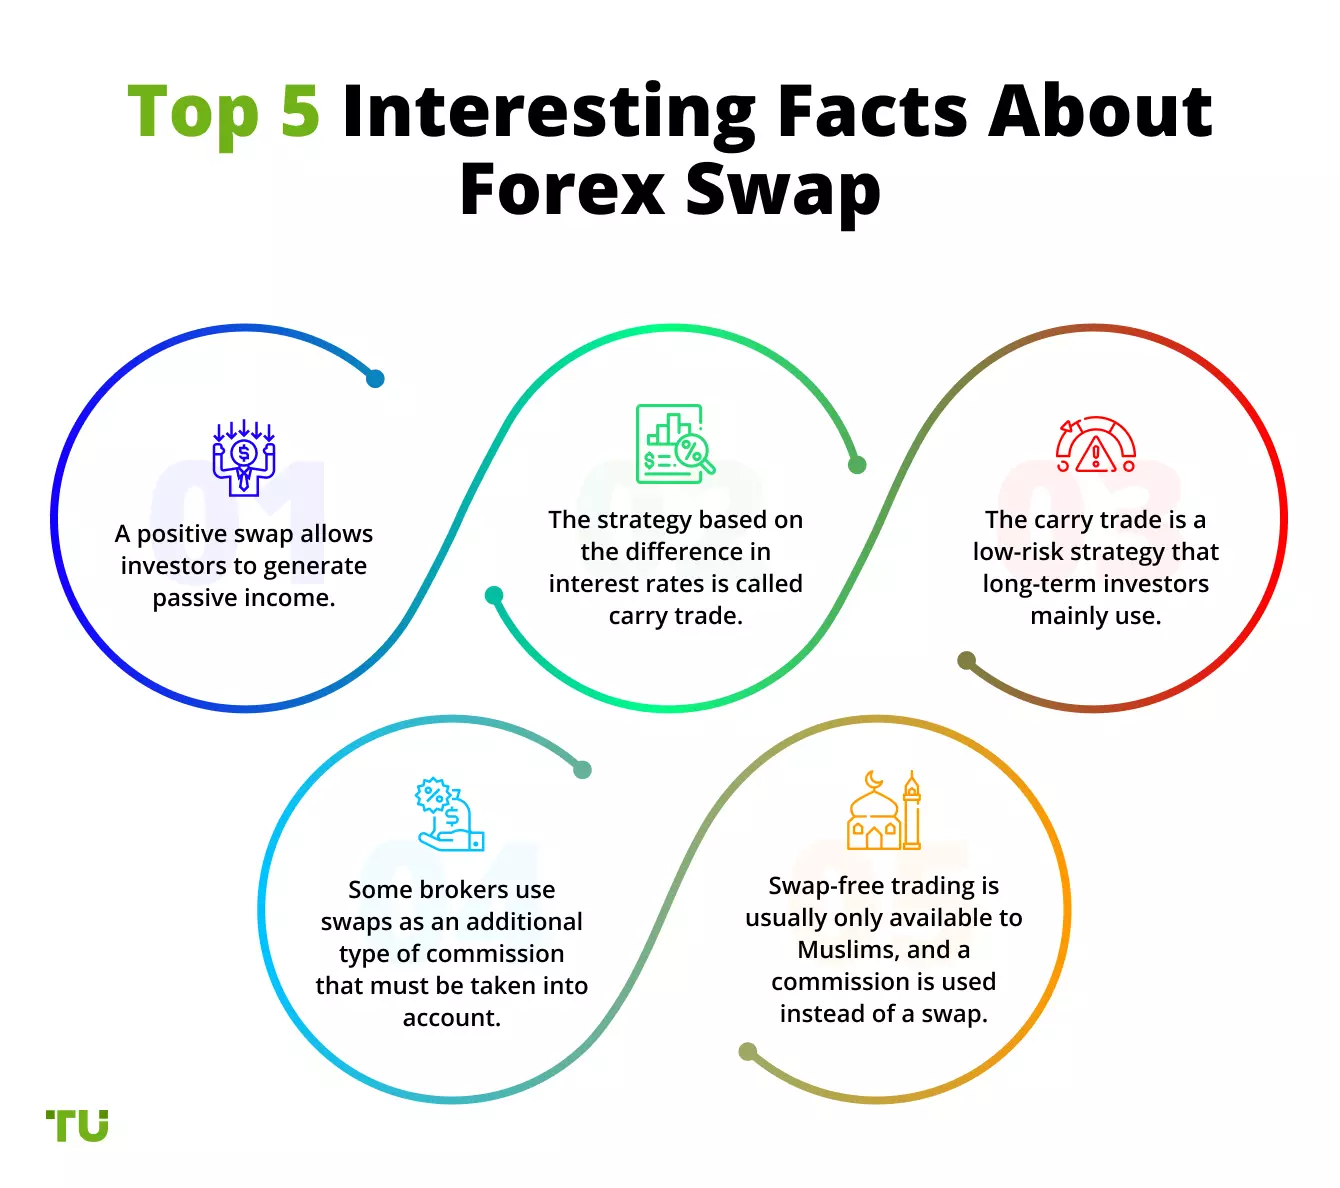 Top 5 Interesting Facts About Forex Swap